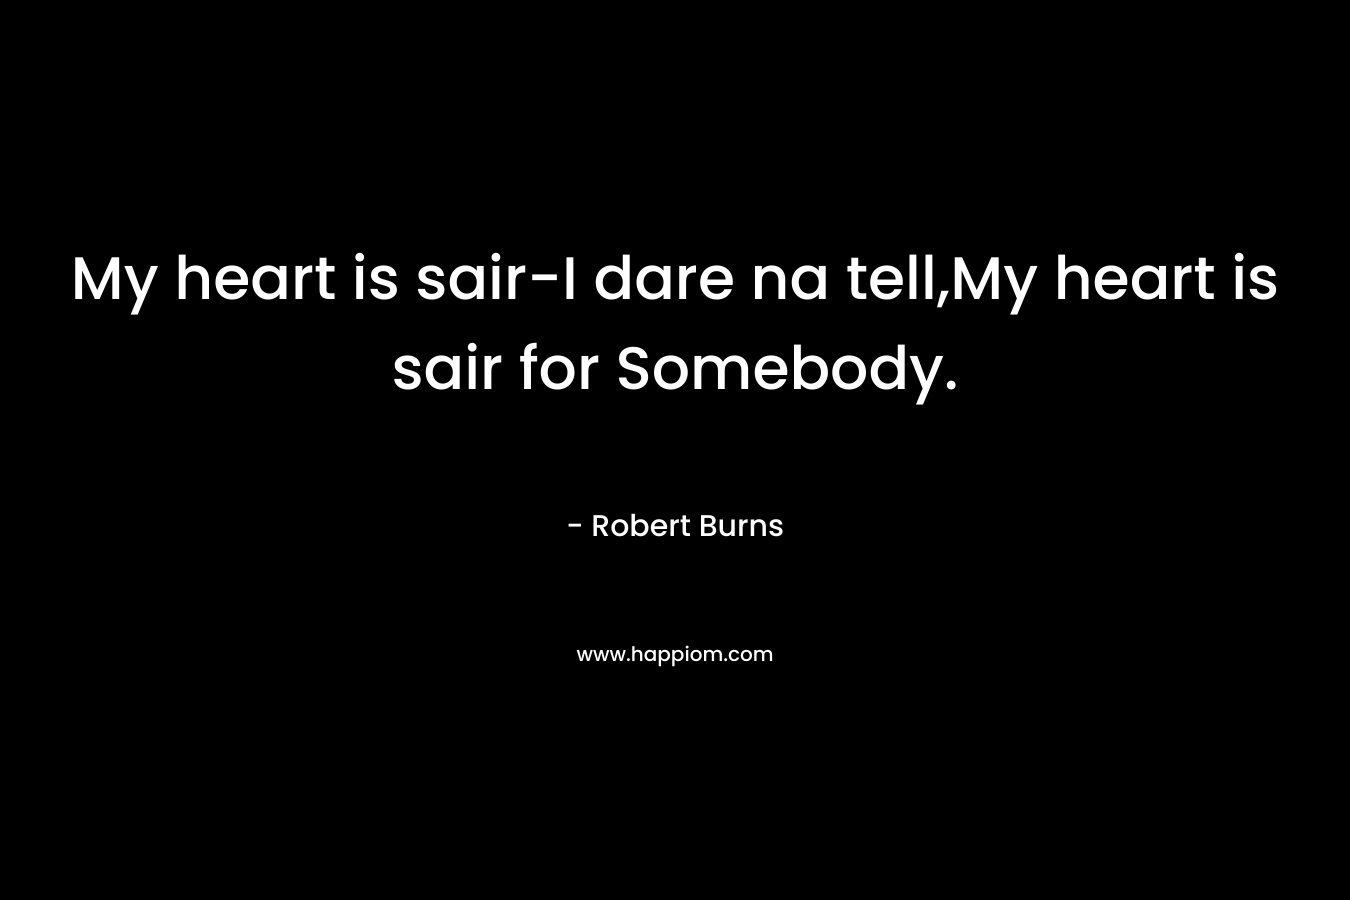 My heart is sair-I dare na tell,My heart is sair for Somebody.